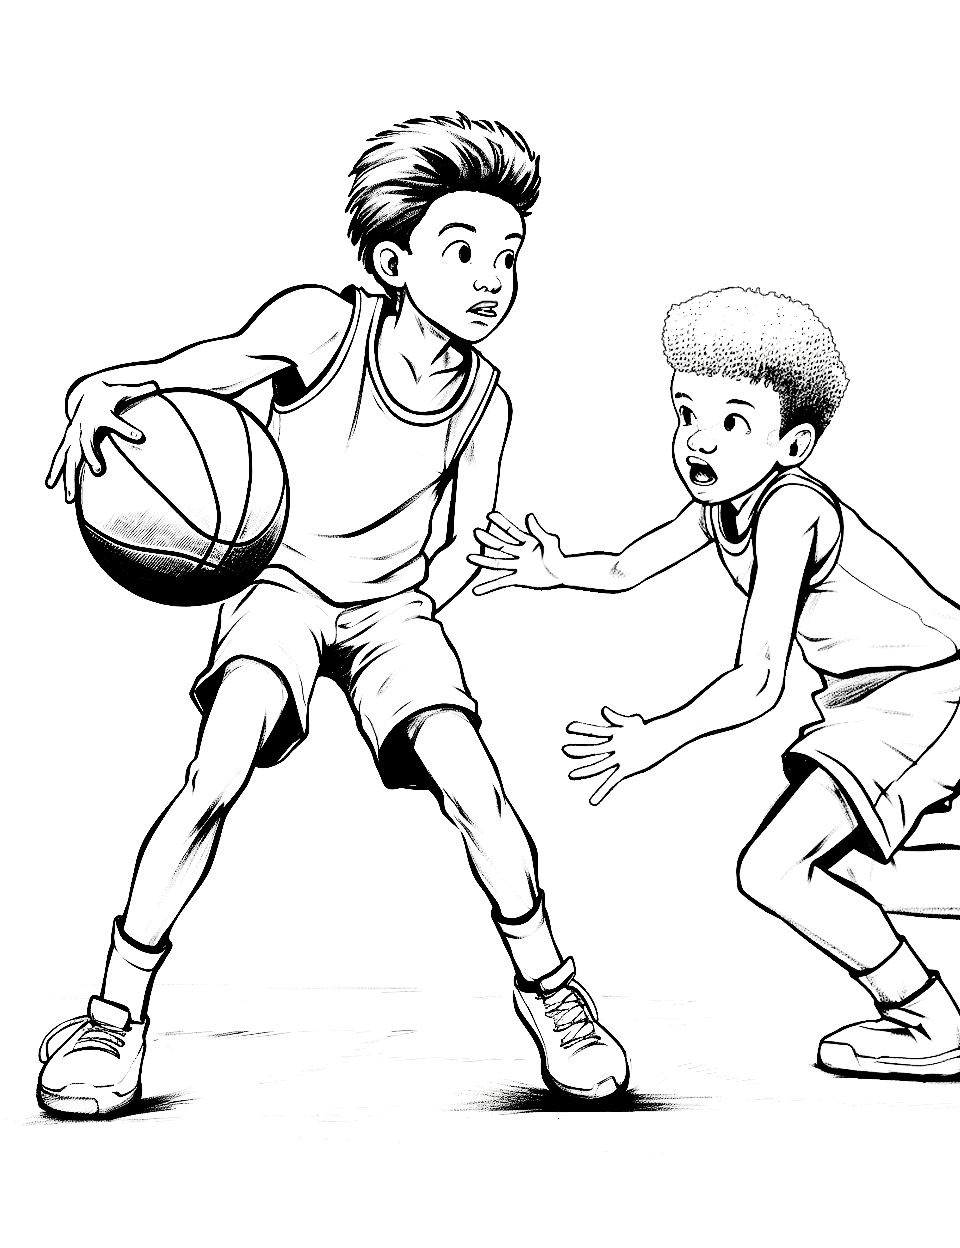 Guarding the Opponent Basketball Coloring Page - Two players in a tense moment, one guarding the other closely as they dribble the ball.